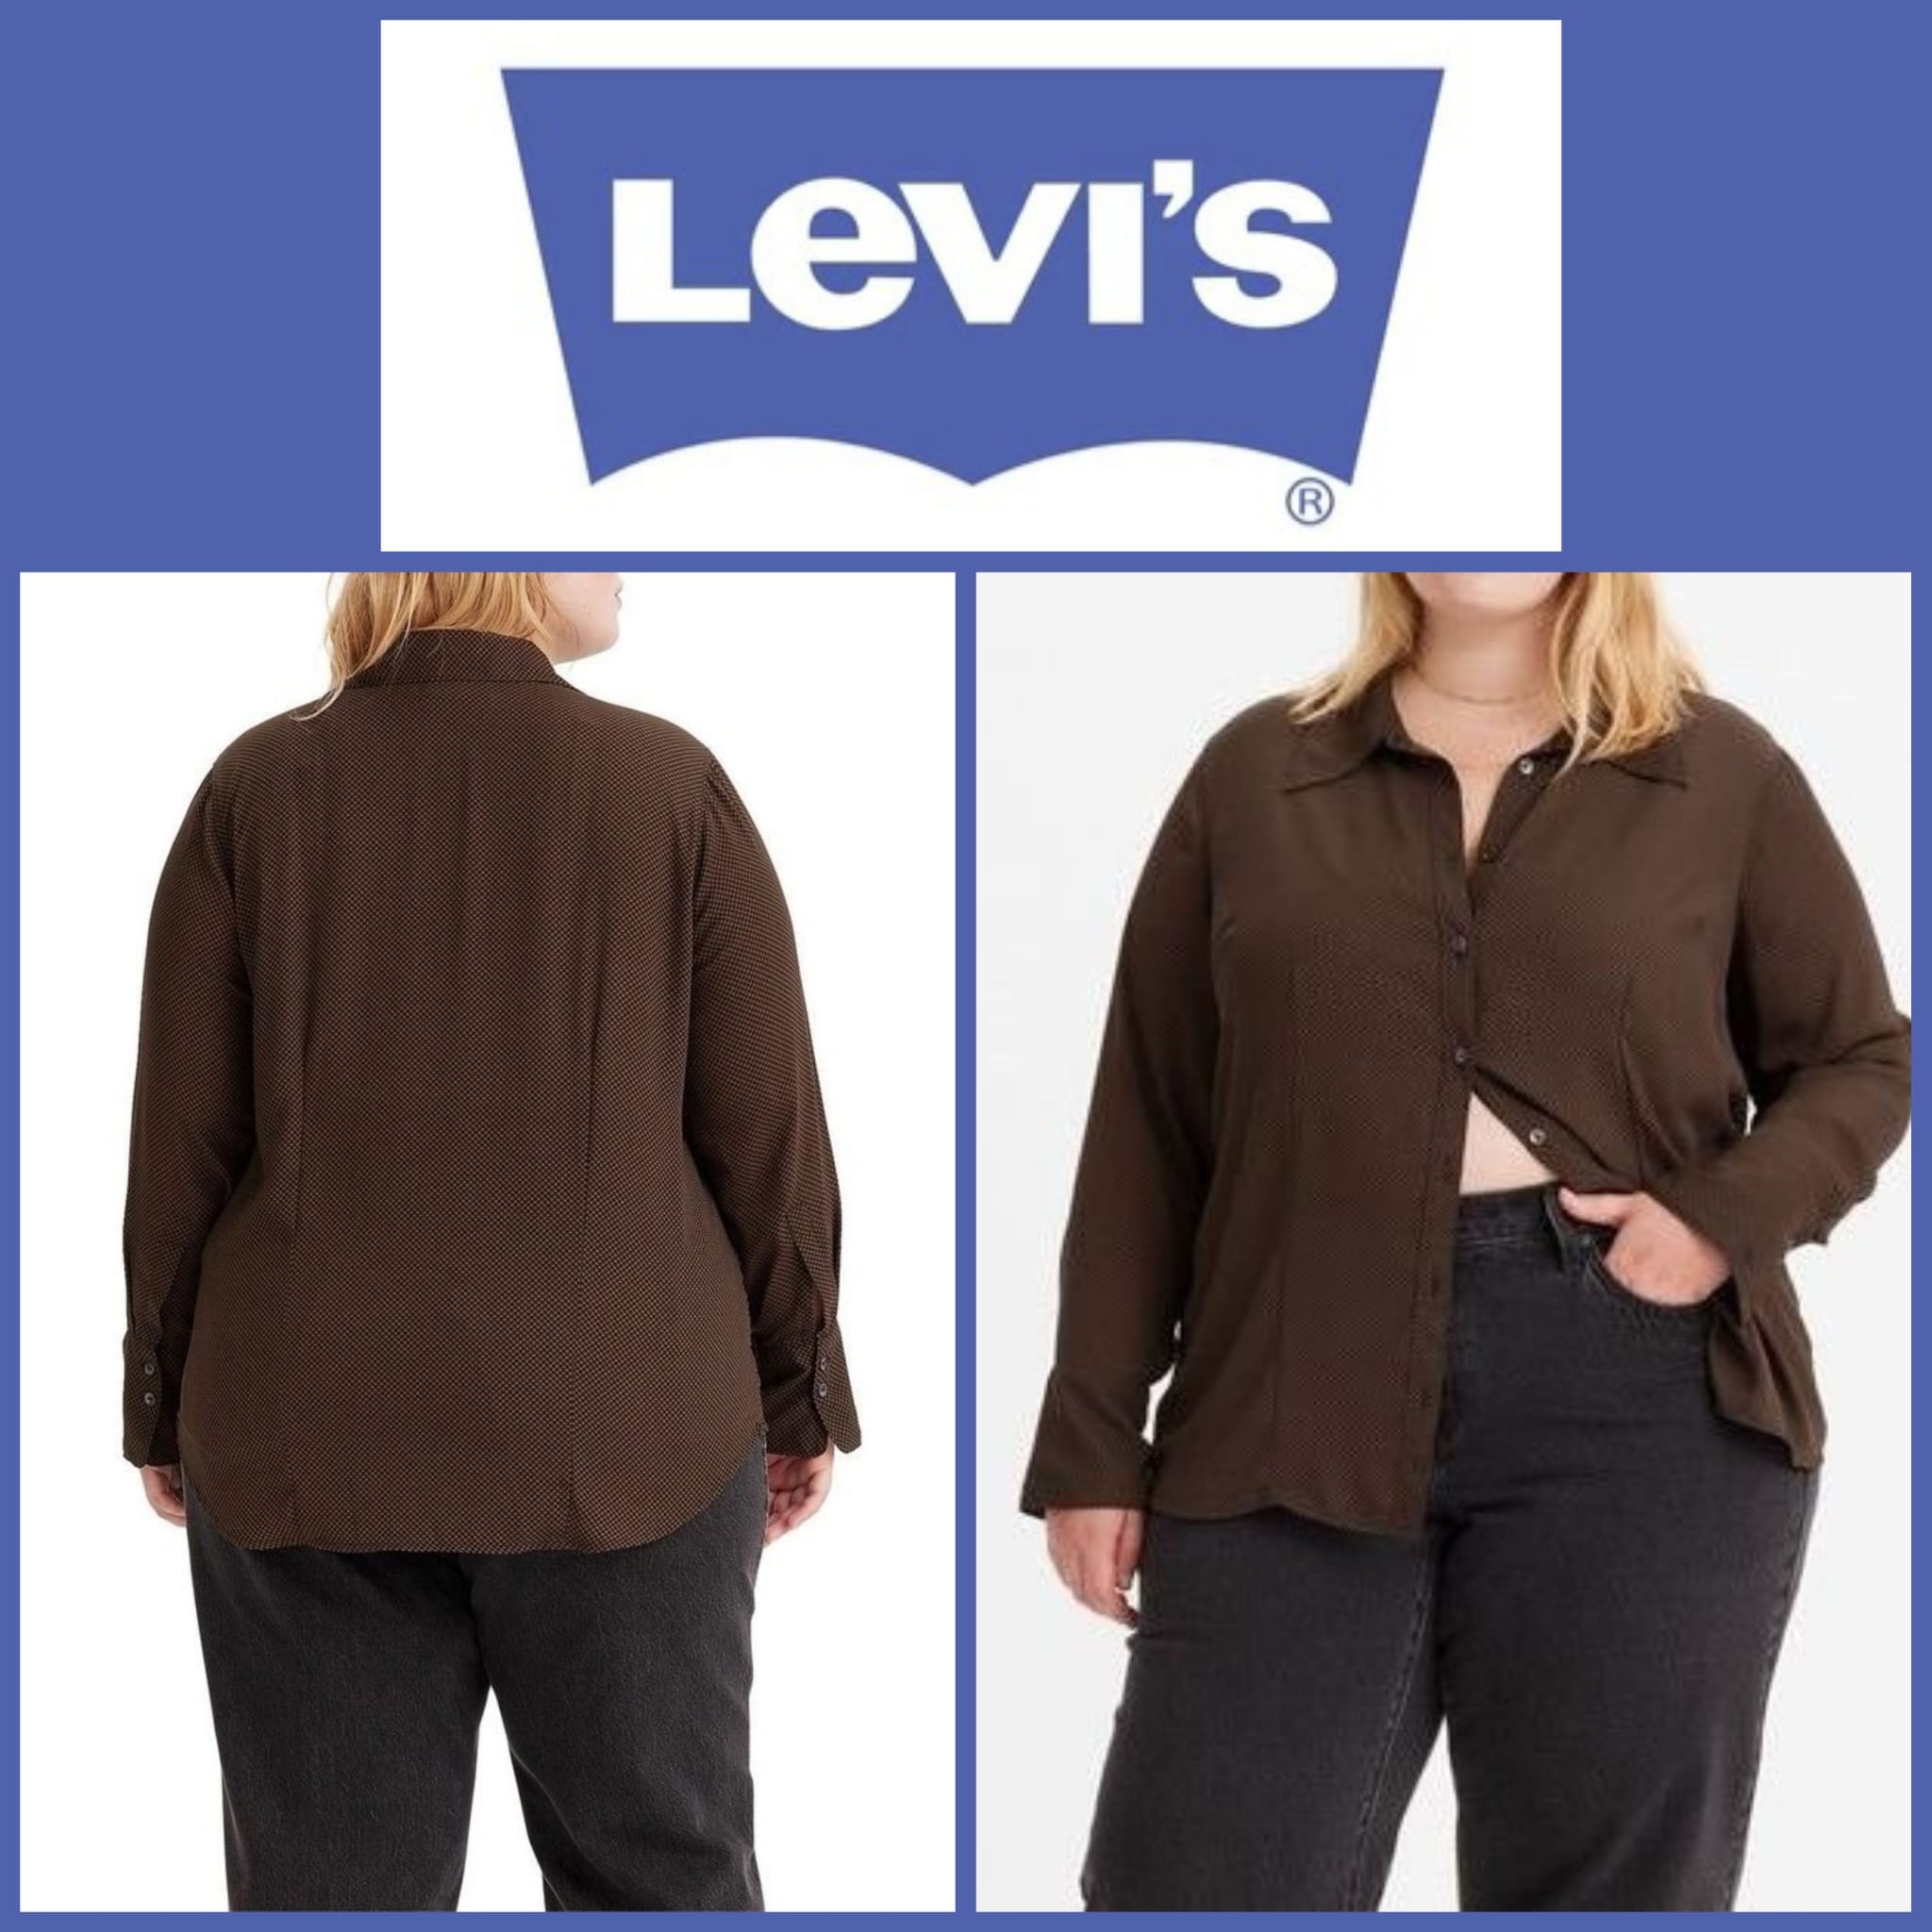 Women's blouse from Levi's Plus